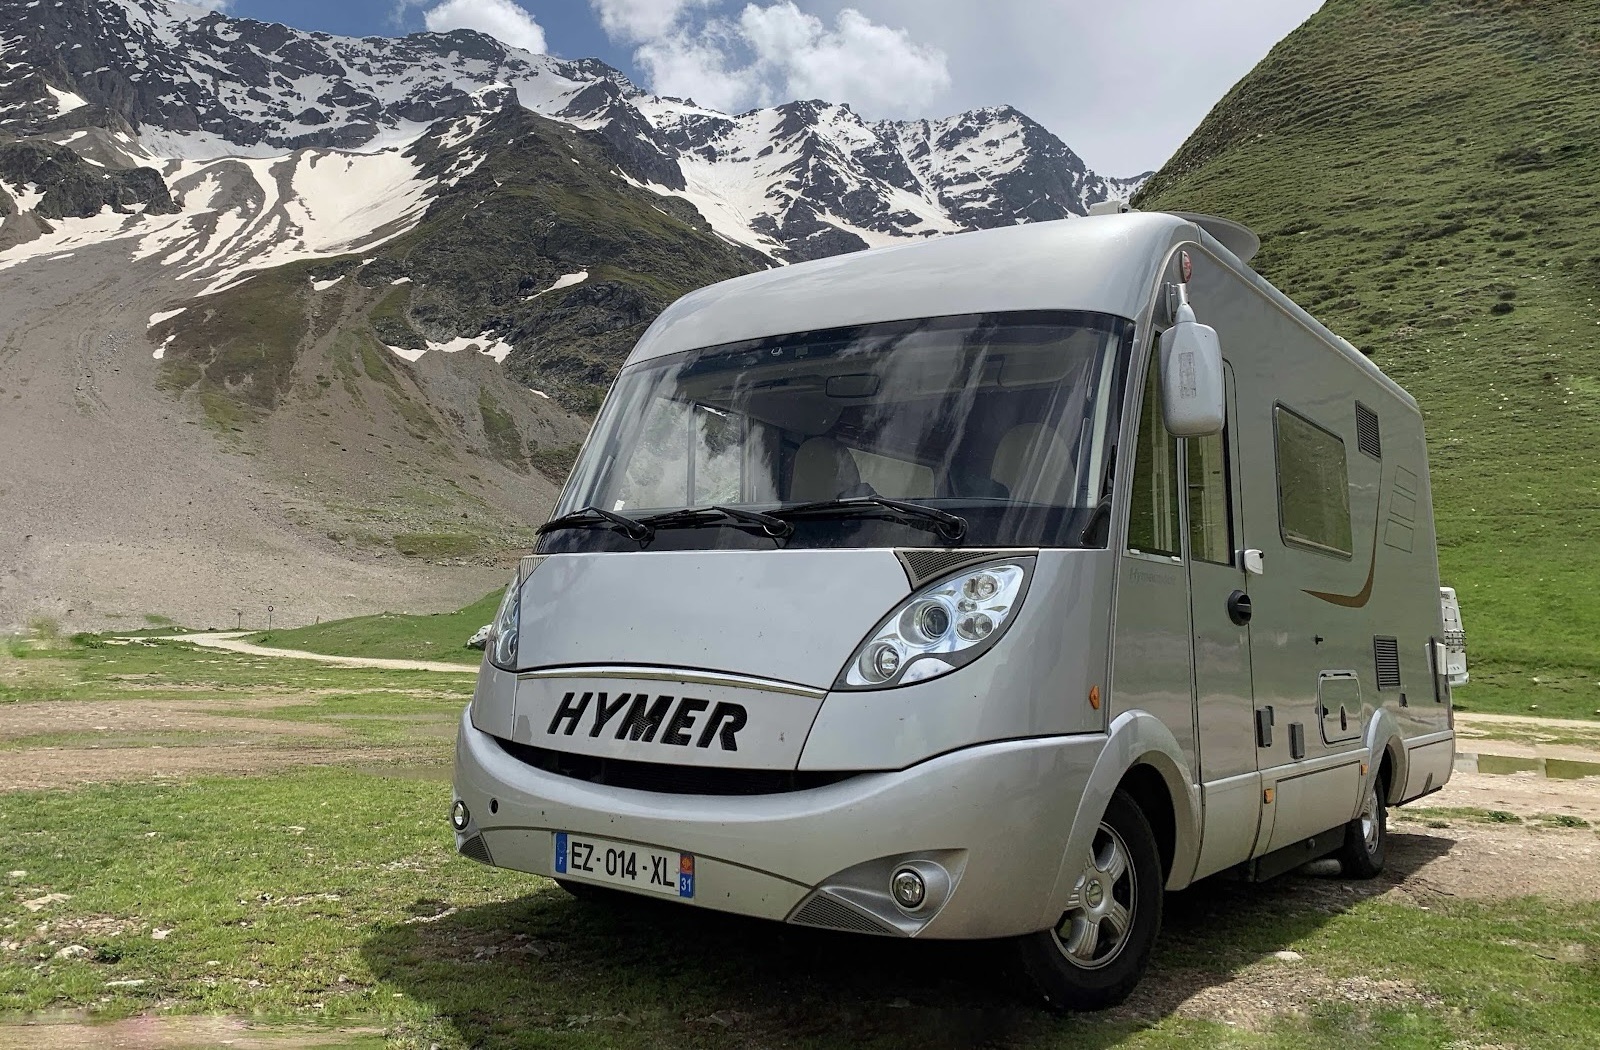 Bijou, our Hymer B544SL is for sale!